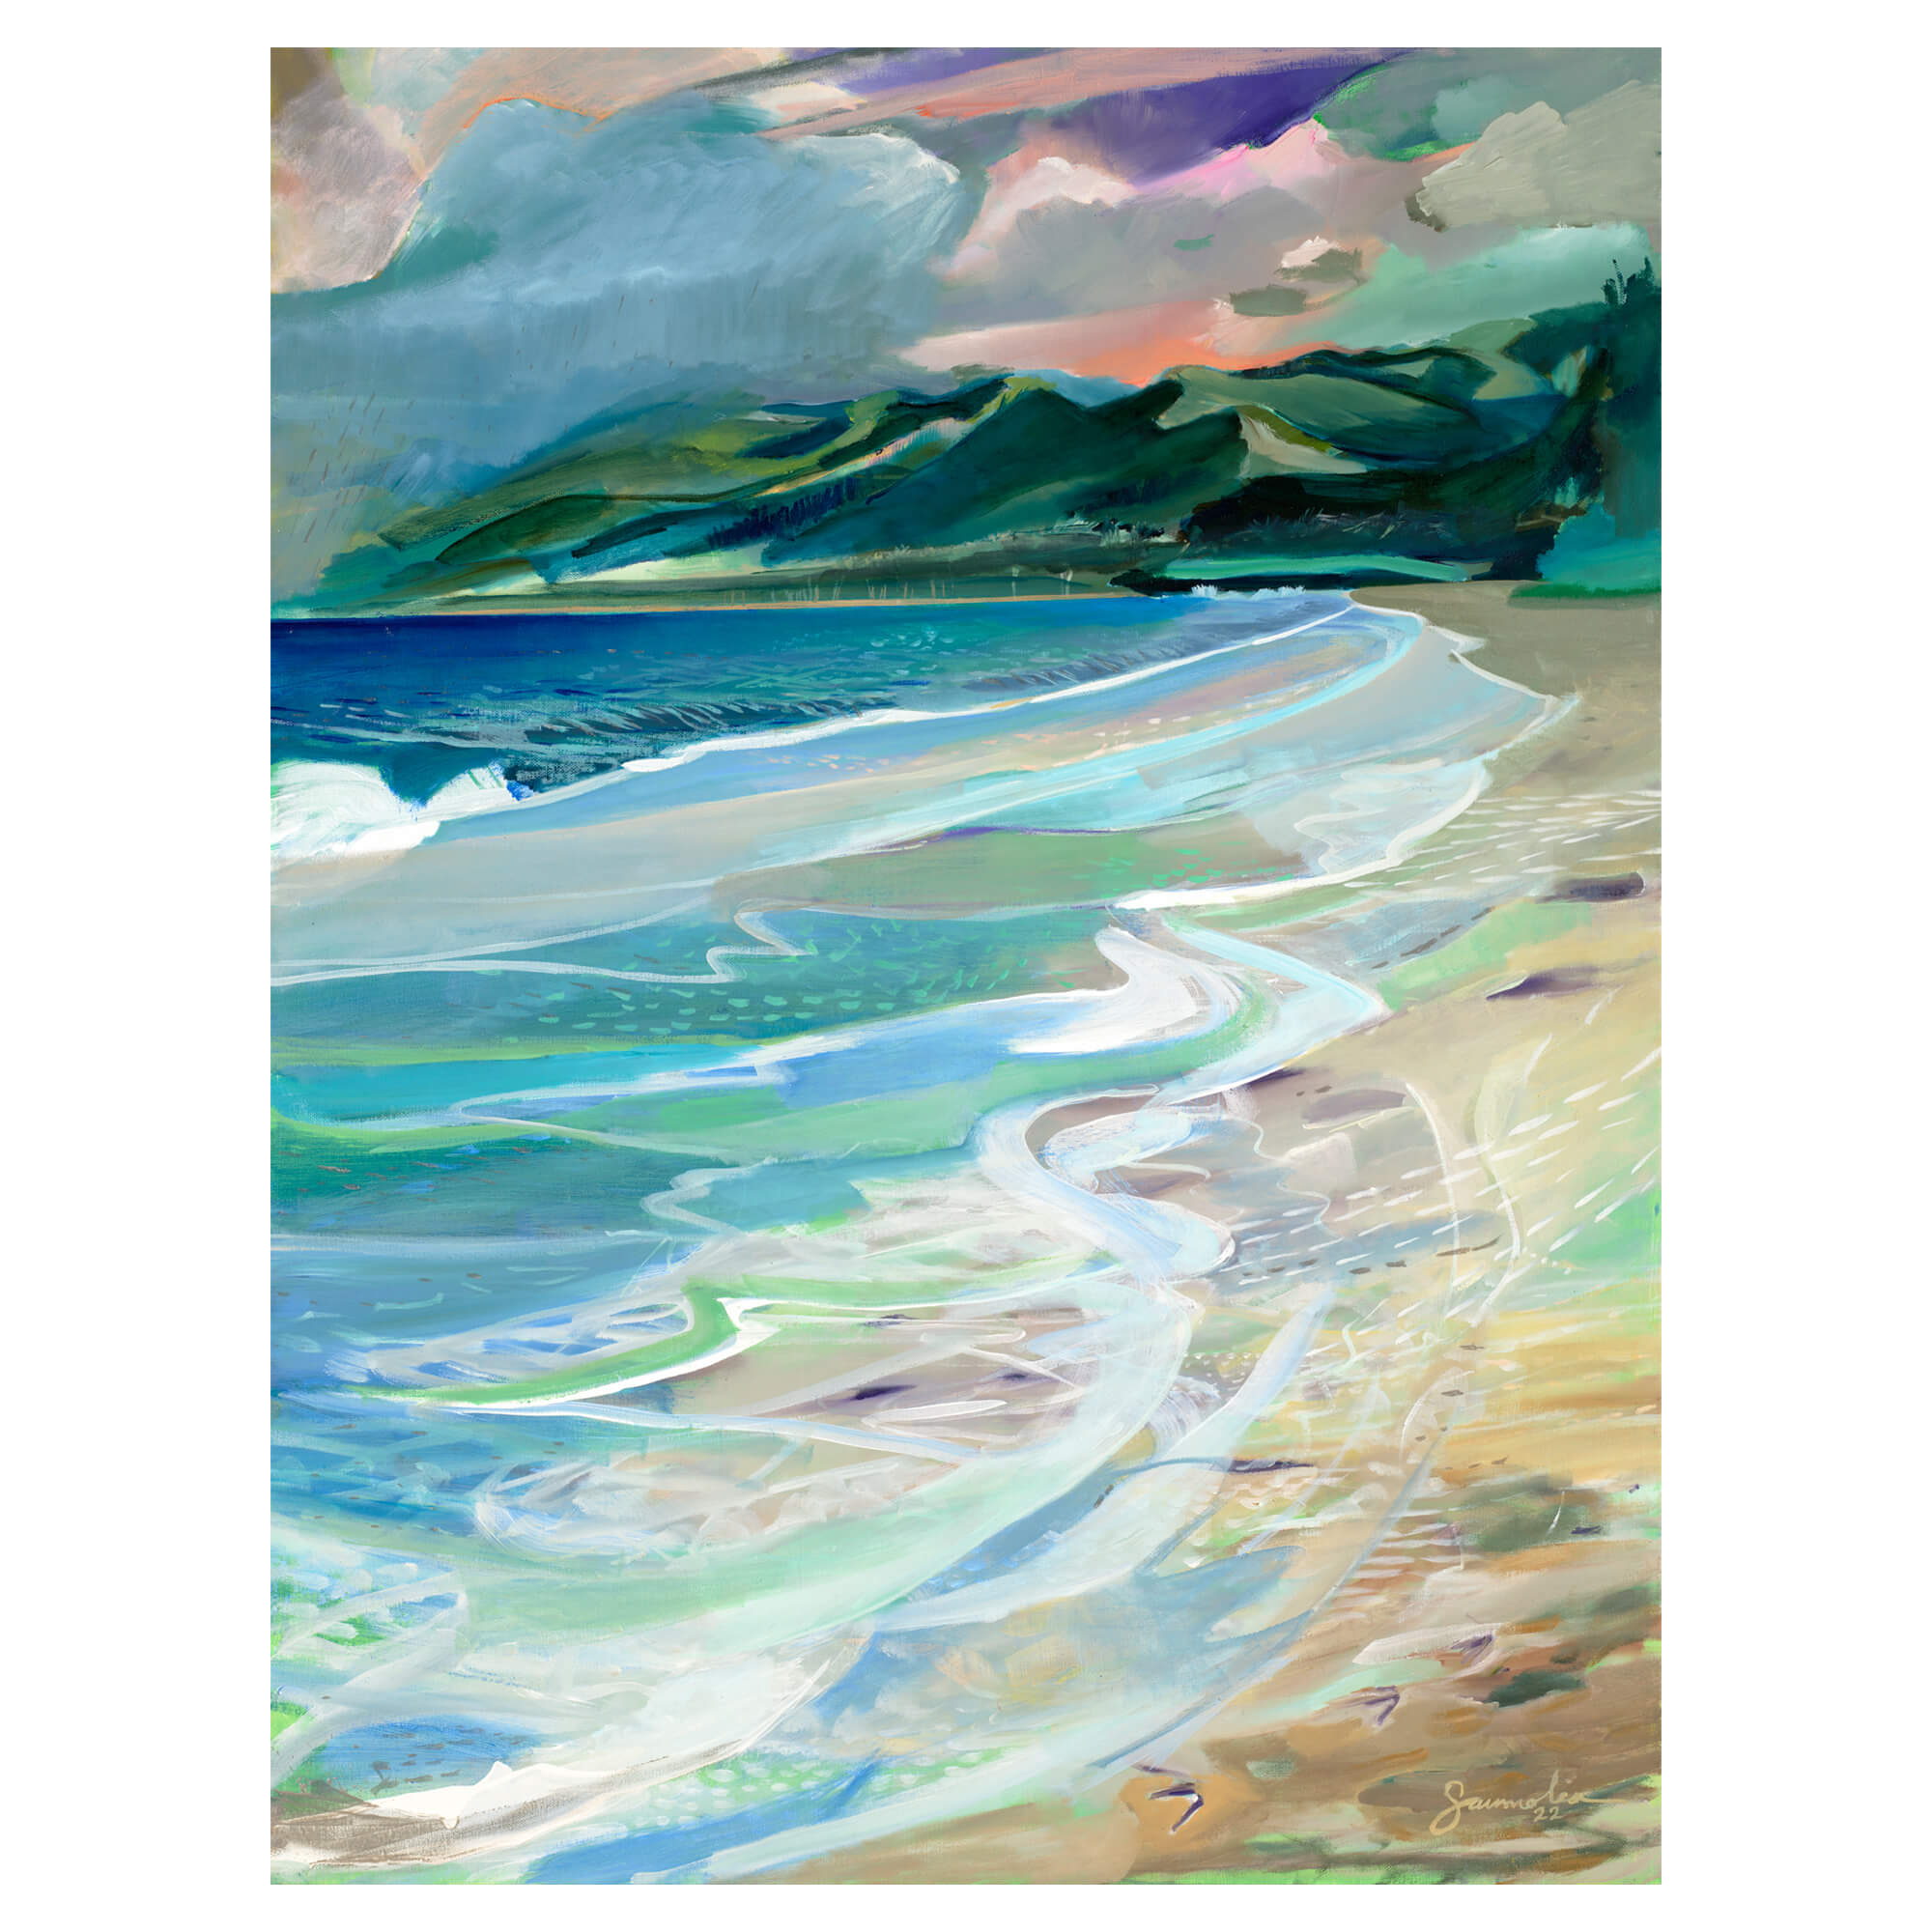 A watercolor paper giclée print featuring a beautiful abstract landscape with crashing waves and distant mountains by popular Hawaii artist Saumolia Puapuaga